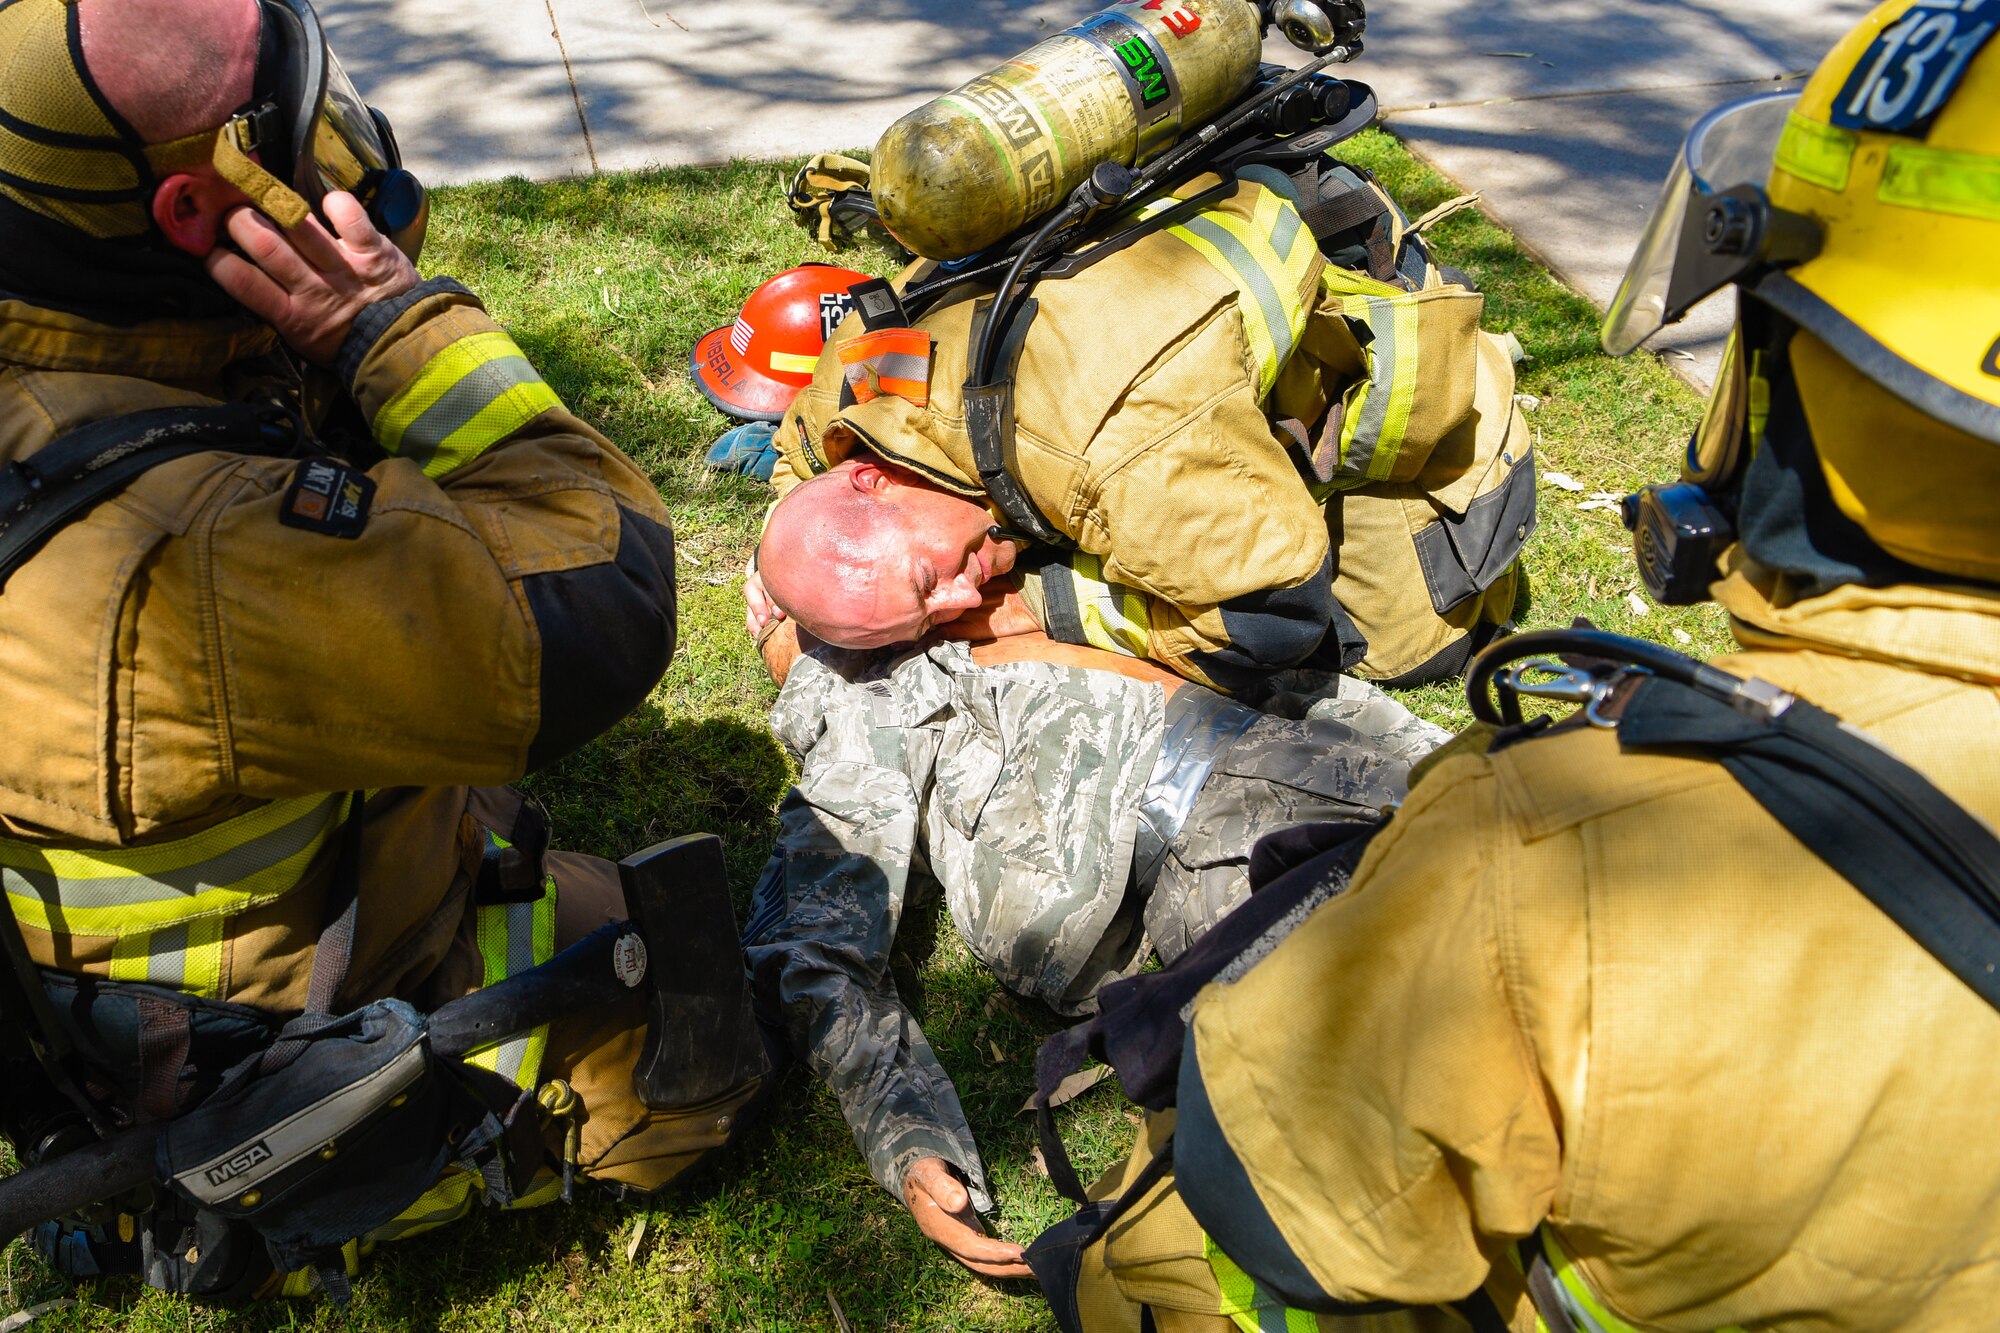 Firefighters huddle around a mannequin while simulating CPR during a joint training exercise May 3, 2019, at Luke Air Force Base, Ariz. The multi-company standard training mimicked a motel fire where the firefighters had to subdue the fire and tend to the injured preparing for transport. (U.S. Air Force photo by Airman 1st Class Zoie Cox)